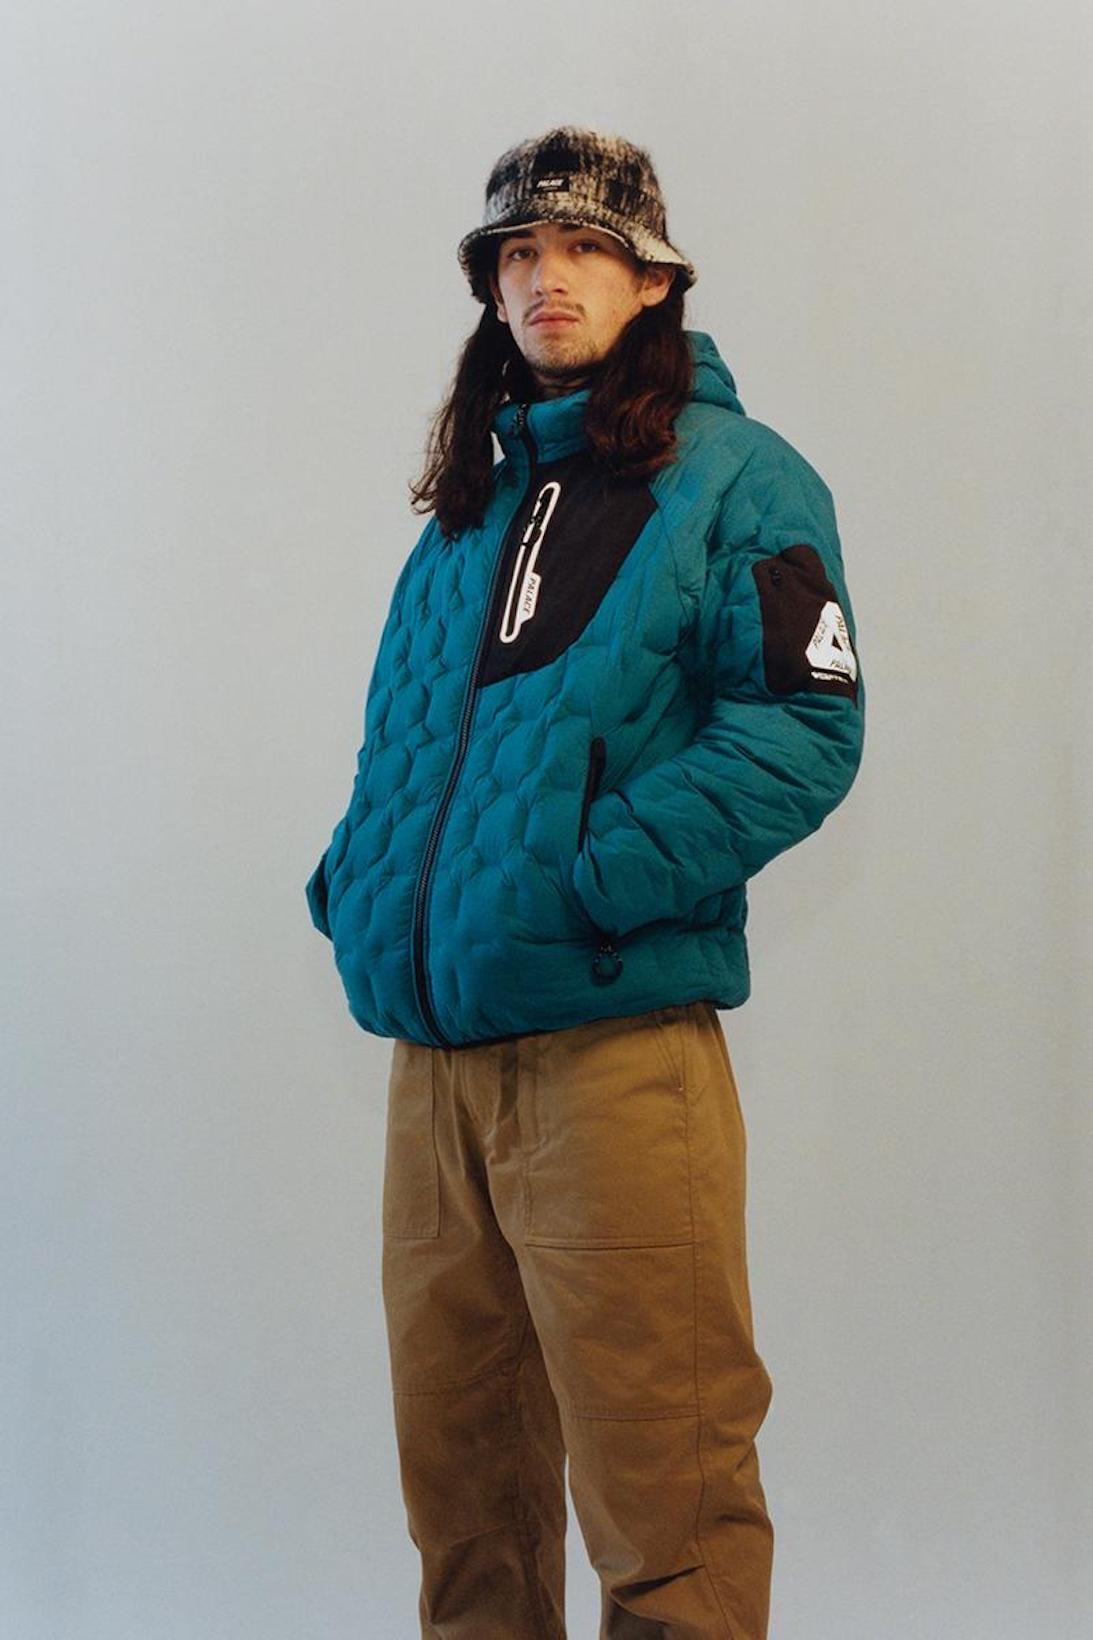 palace skateboards spring summer collection lookbook bucket hat outerwear gore tex jacket pants